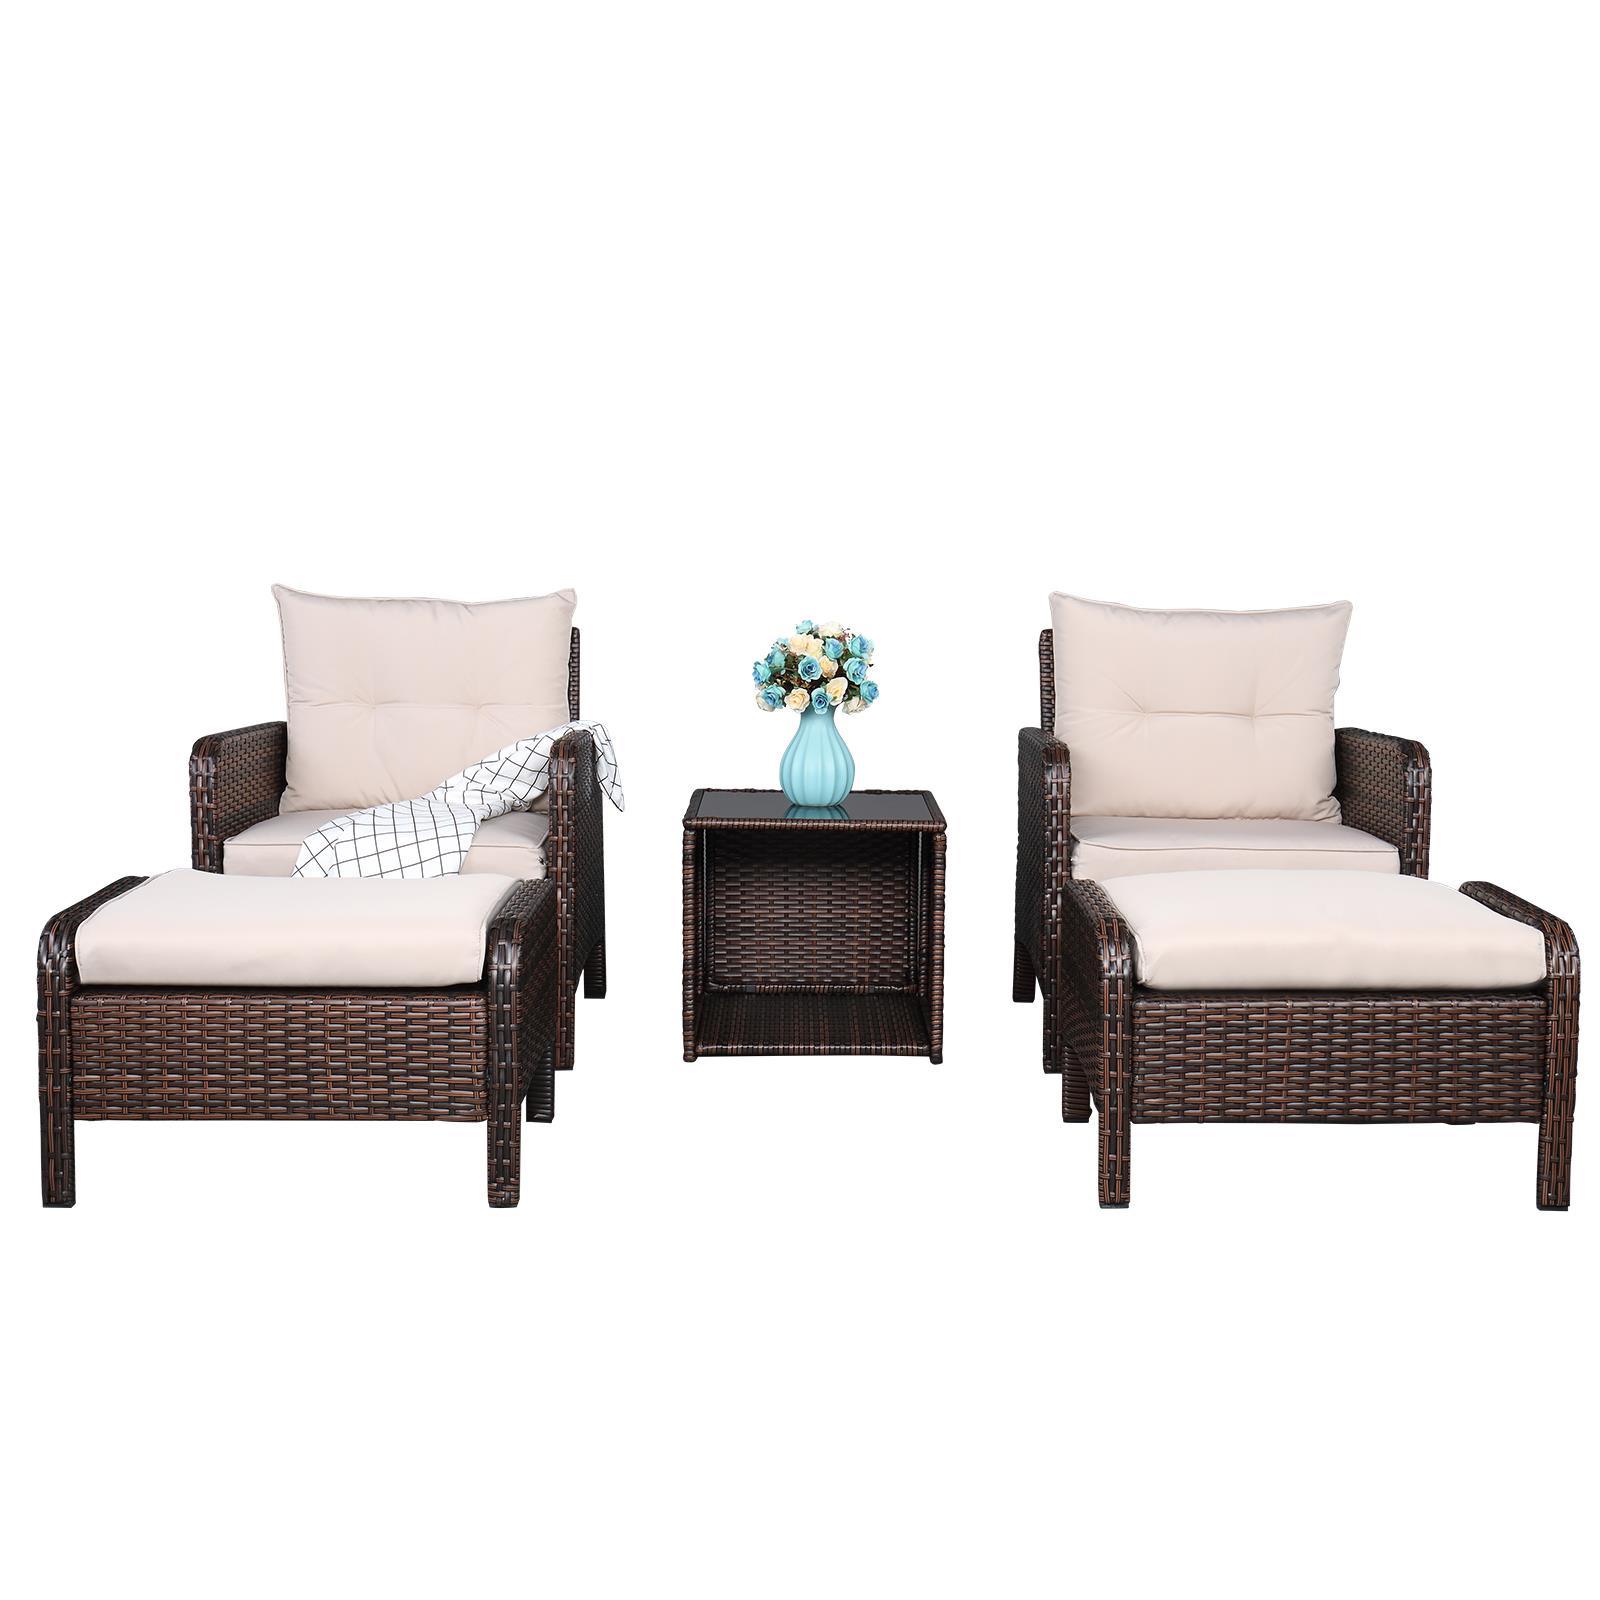 Zimtown 5 Piece Outdoor Patio Furniture Set with Ottomans and Side Table, Iron Frame - image 4 of 11